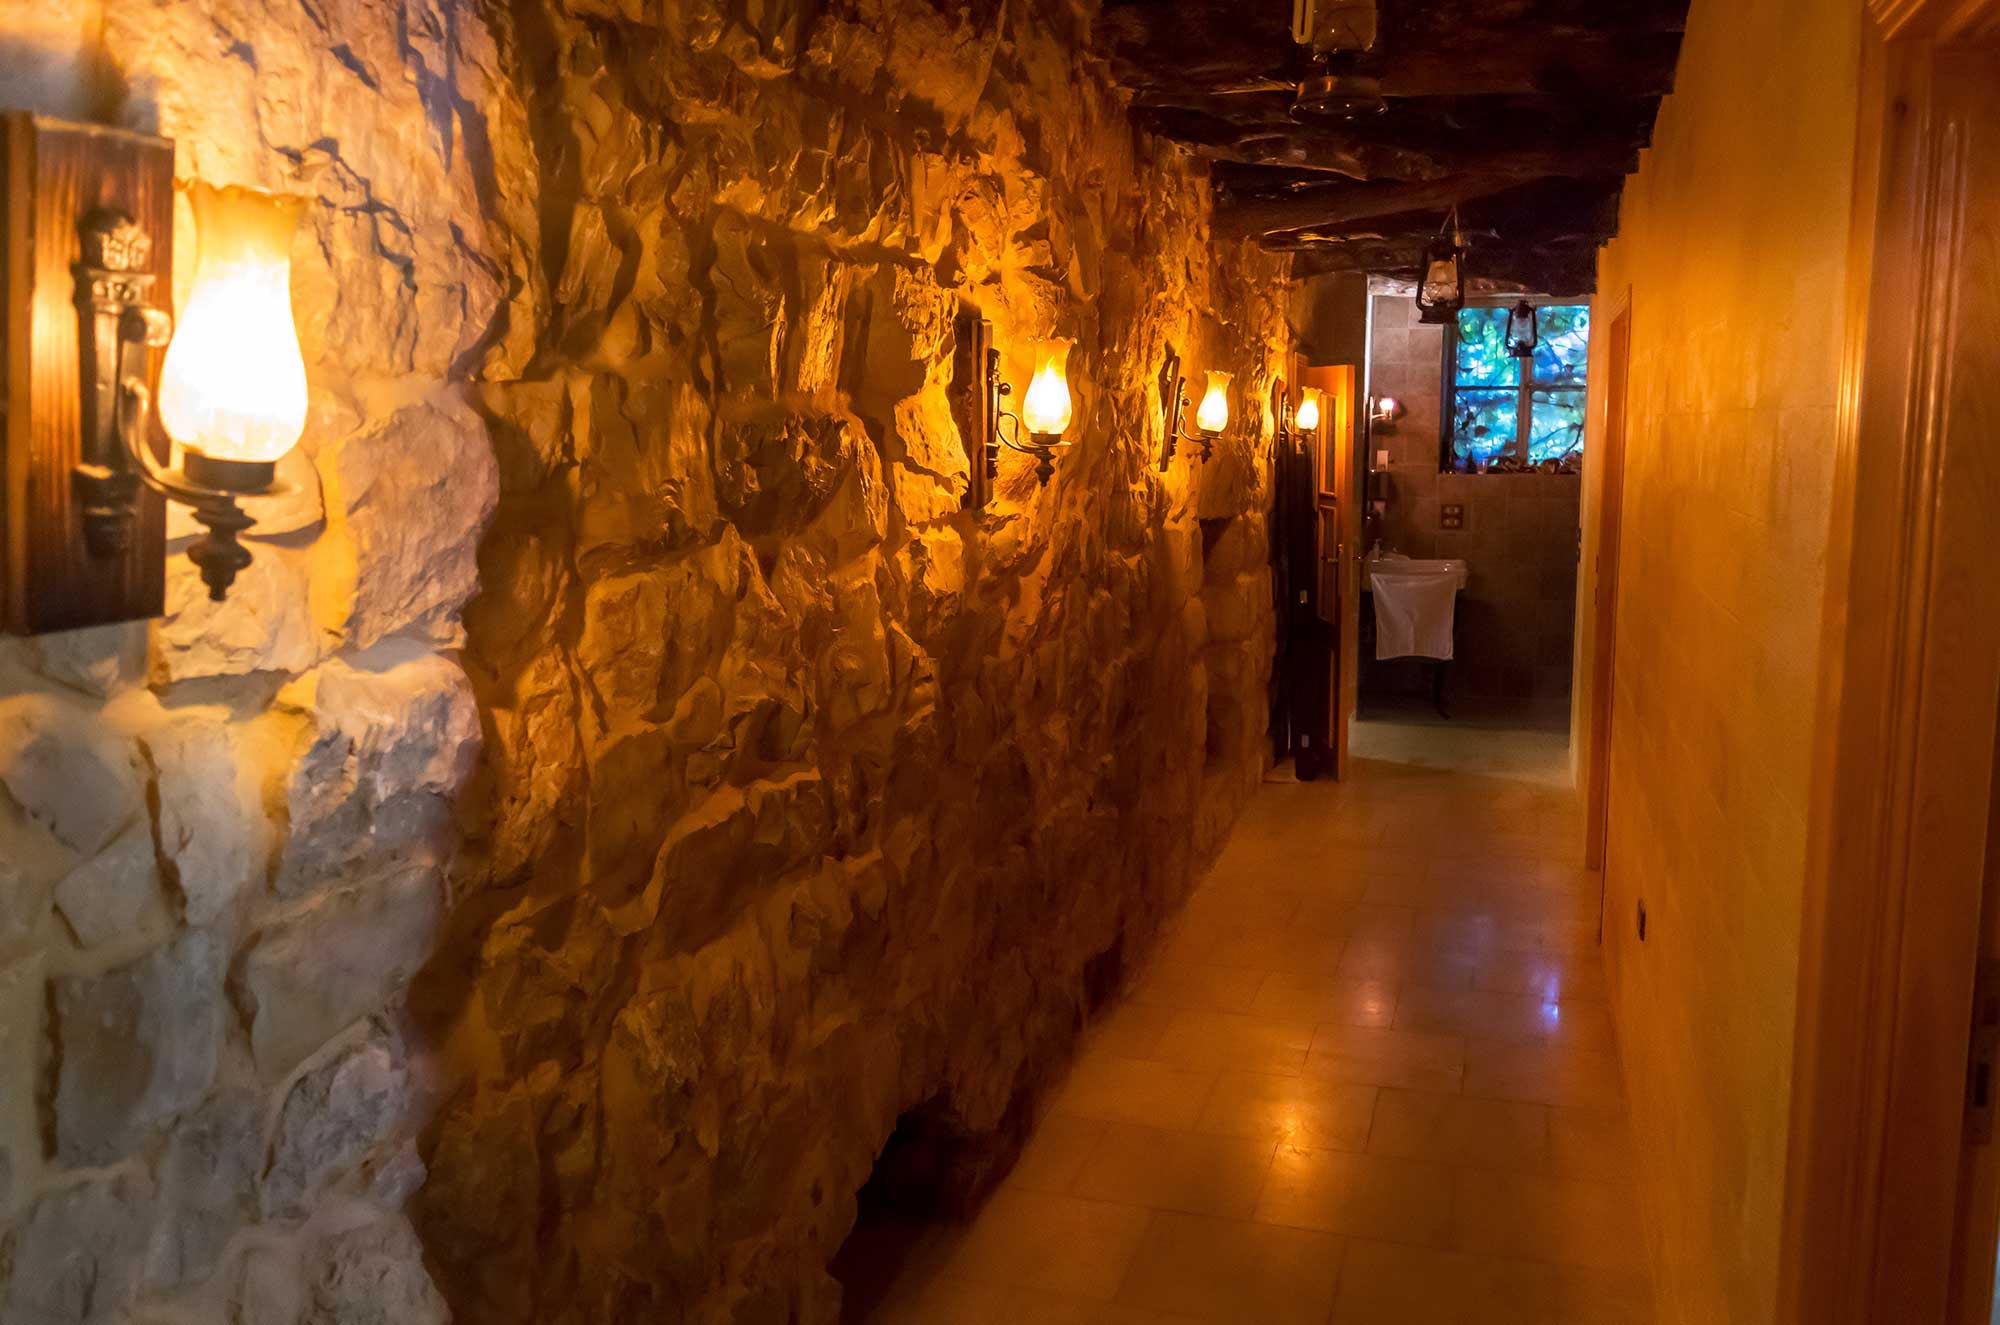 This stone wall corridor reflects the traditional elegance of the house.